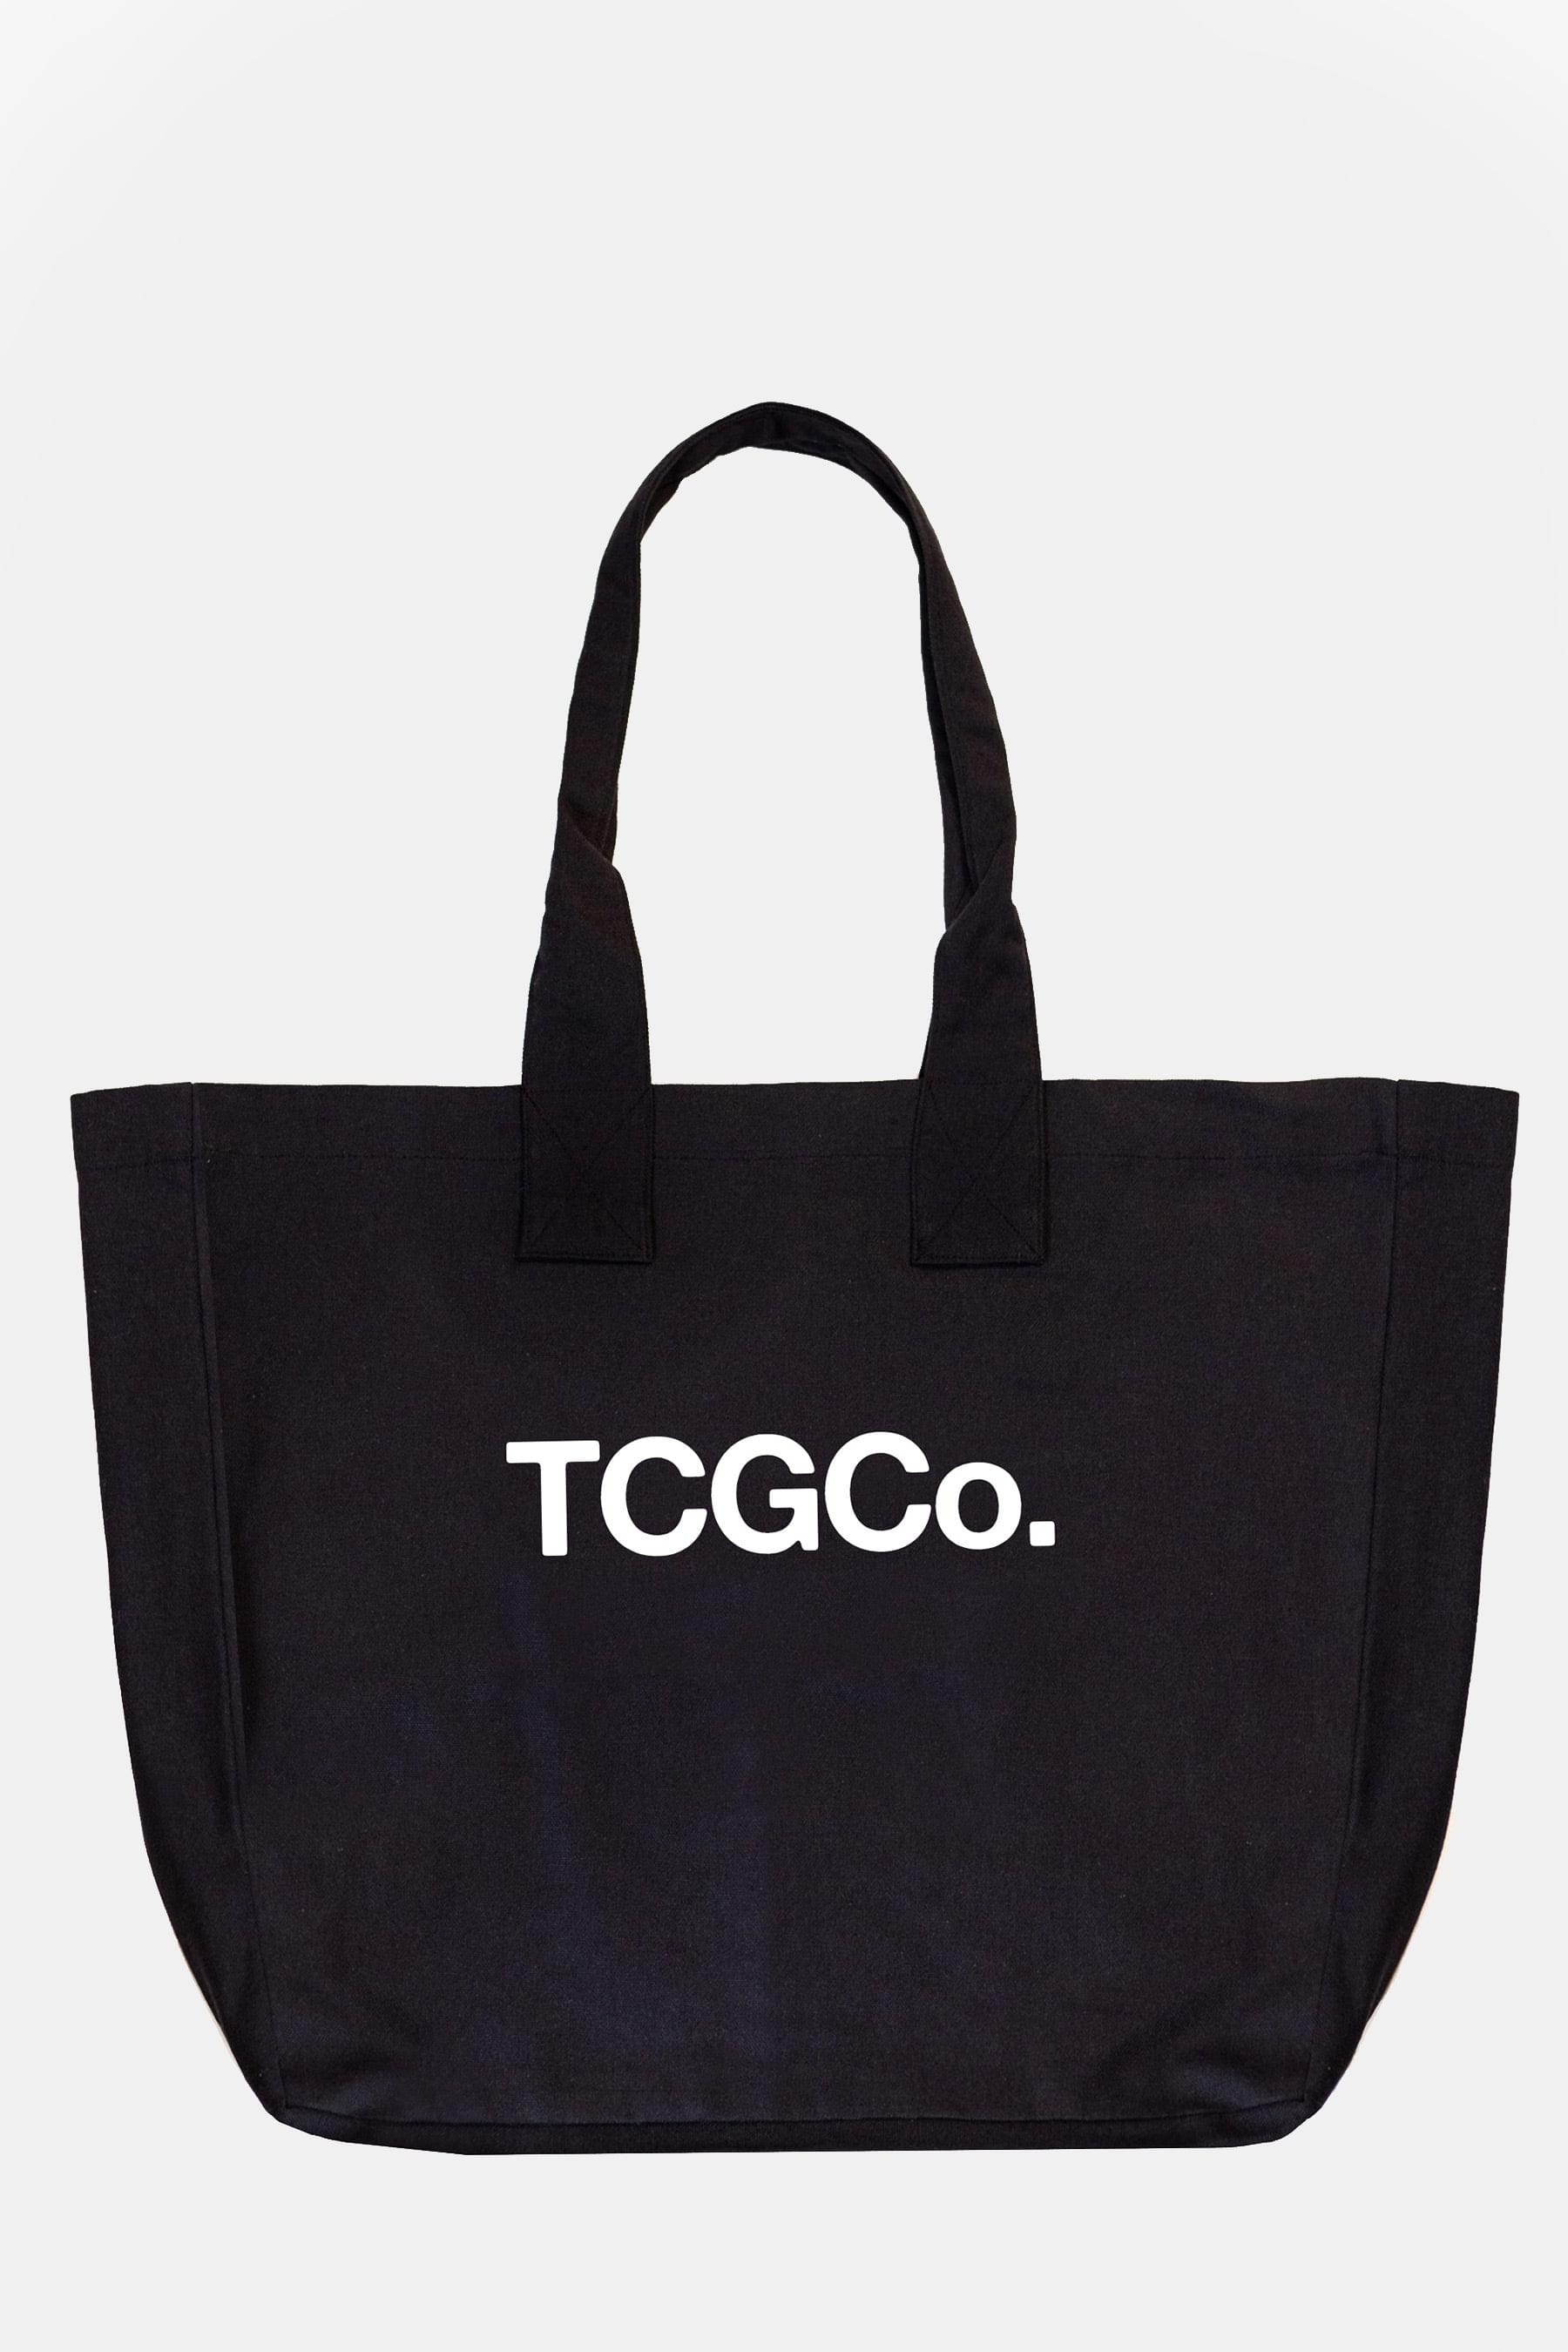 Charcoal 100% Recycled Cotton Market Tote - TCGCo Logo